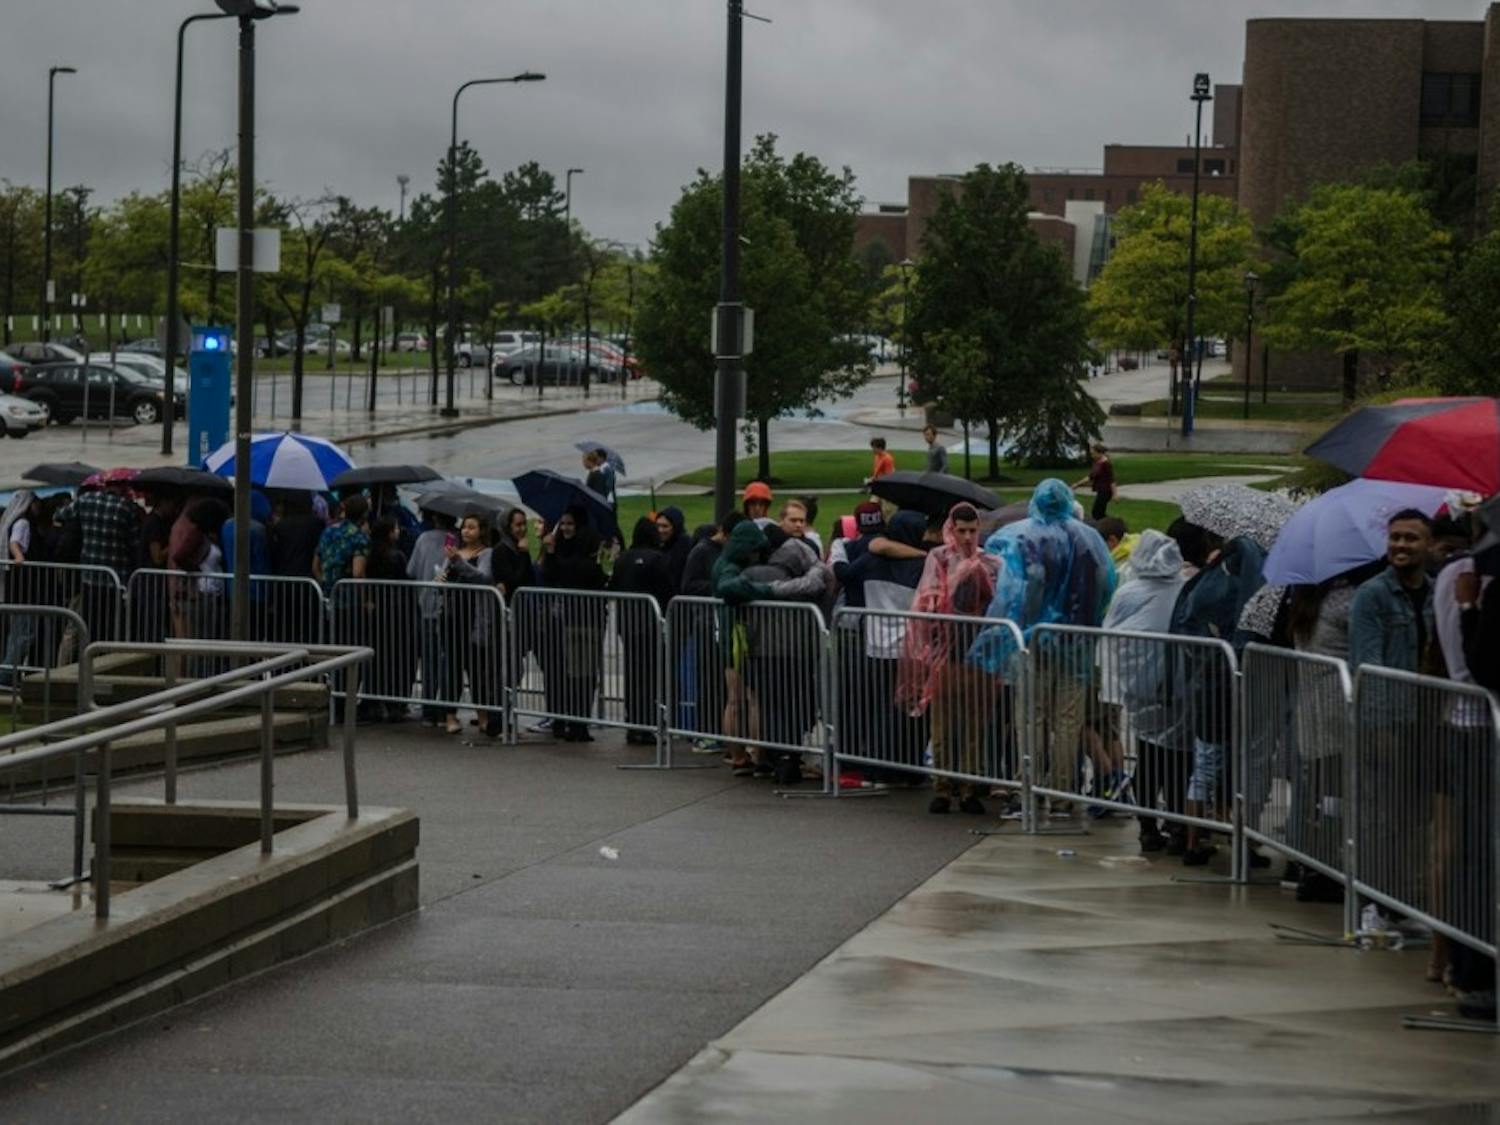 Students started&nbsp;lining up more than three hours before 2015 Fall Fest’s scheduled start time. The ticket policy has changed for this year's Fall Fest and students are unable to wait in line before 4:30 p.m. the day of the show.&nbsp;